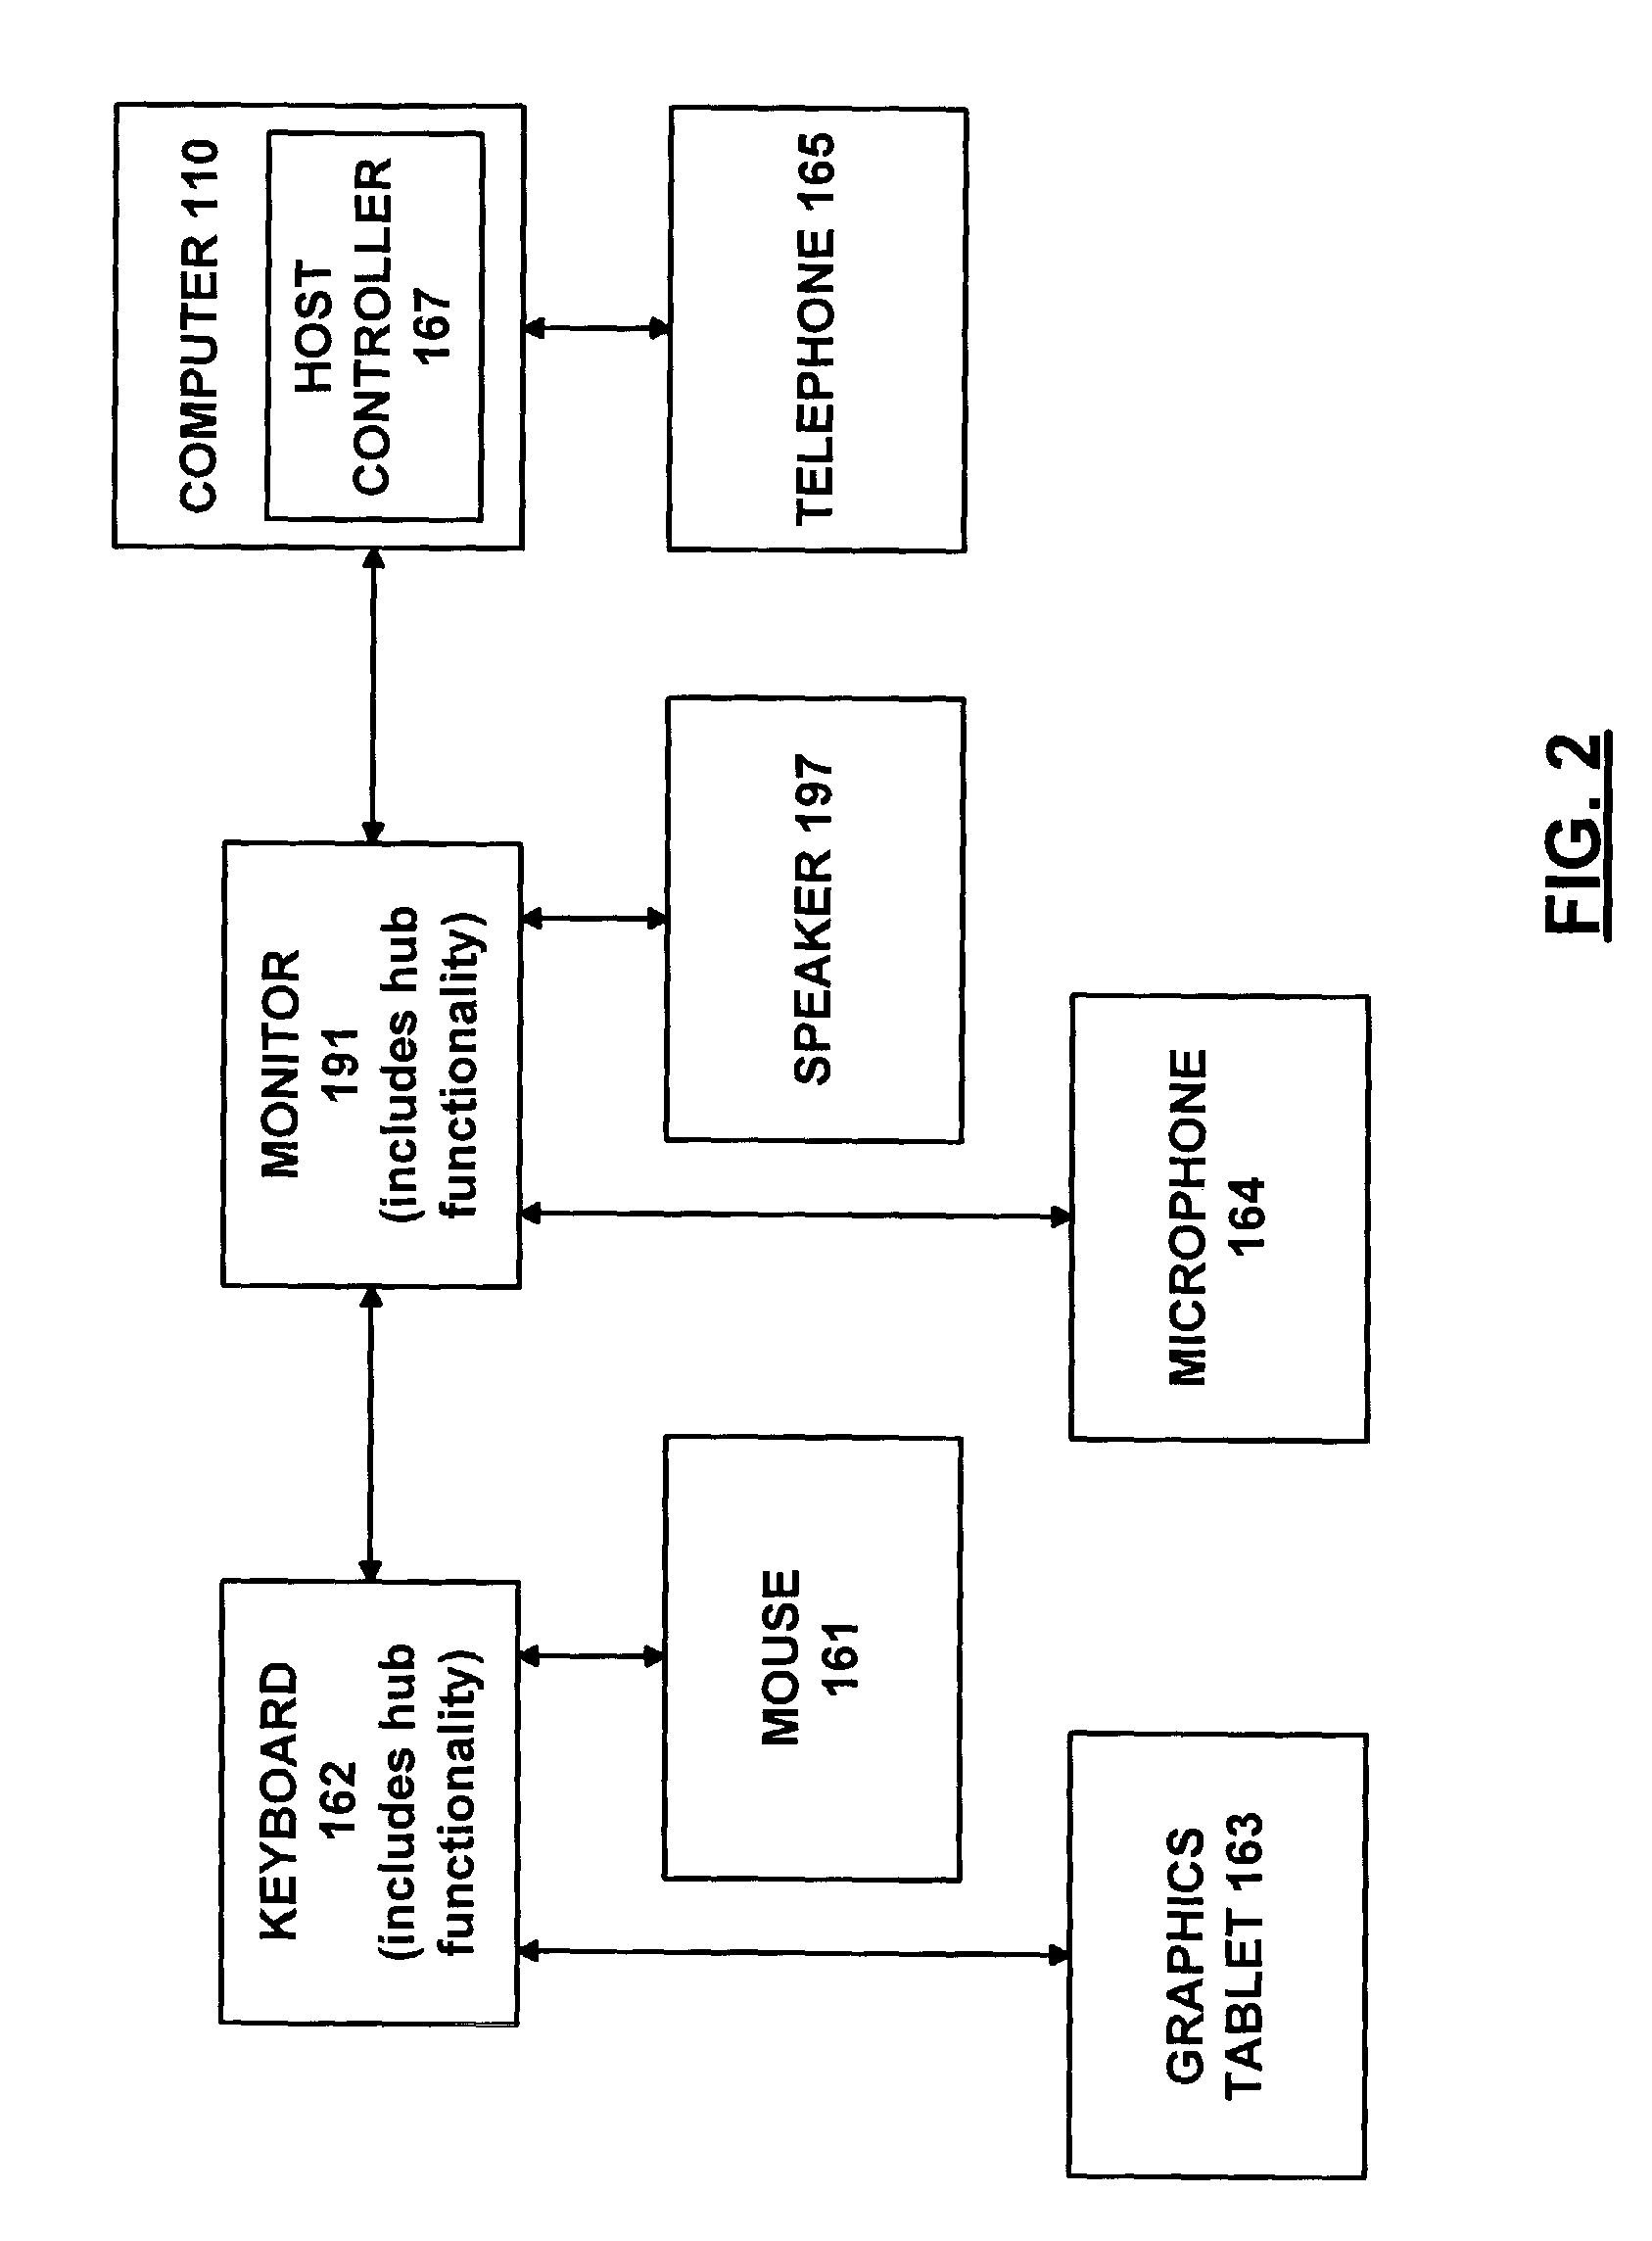 Dynamic substitution of USB data for on-the-fly encryption/decryption